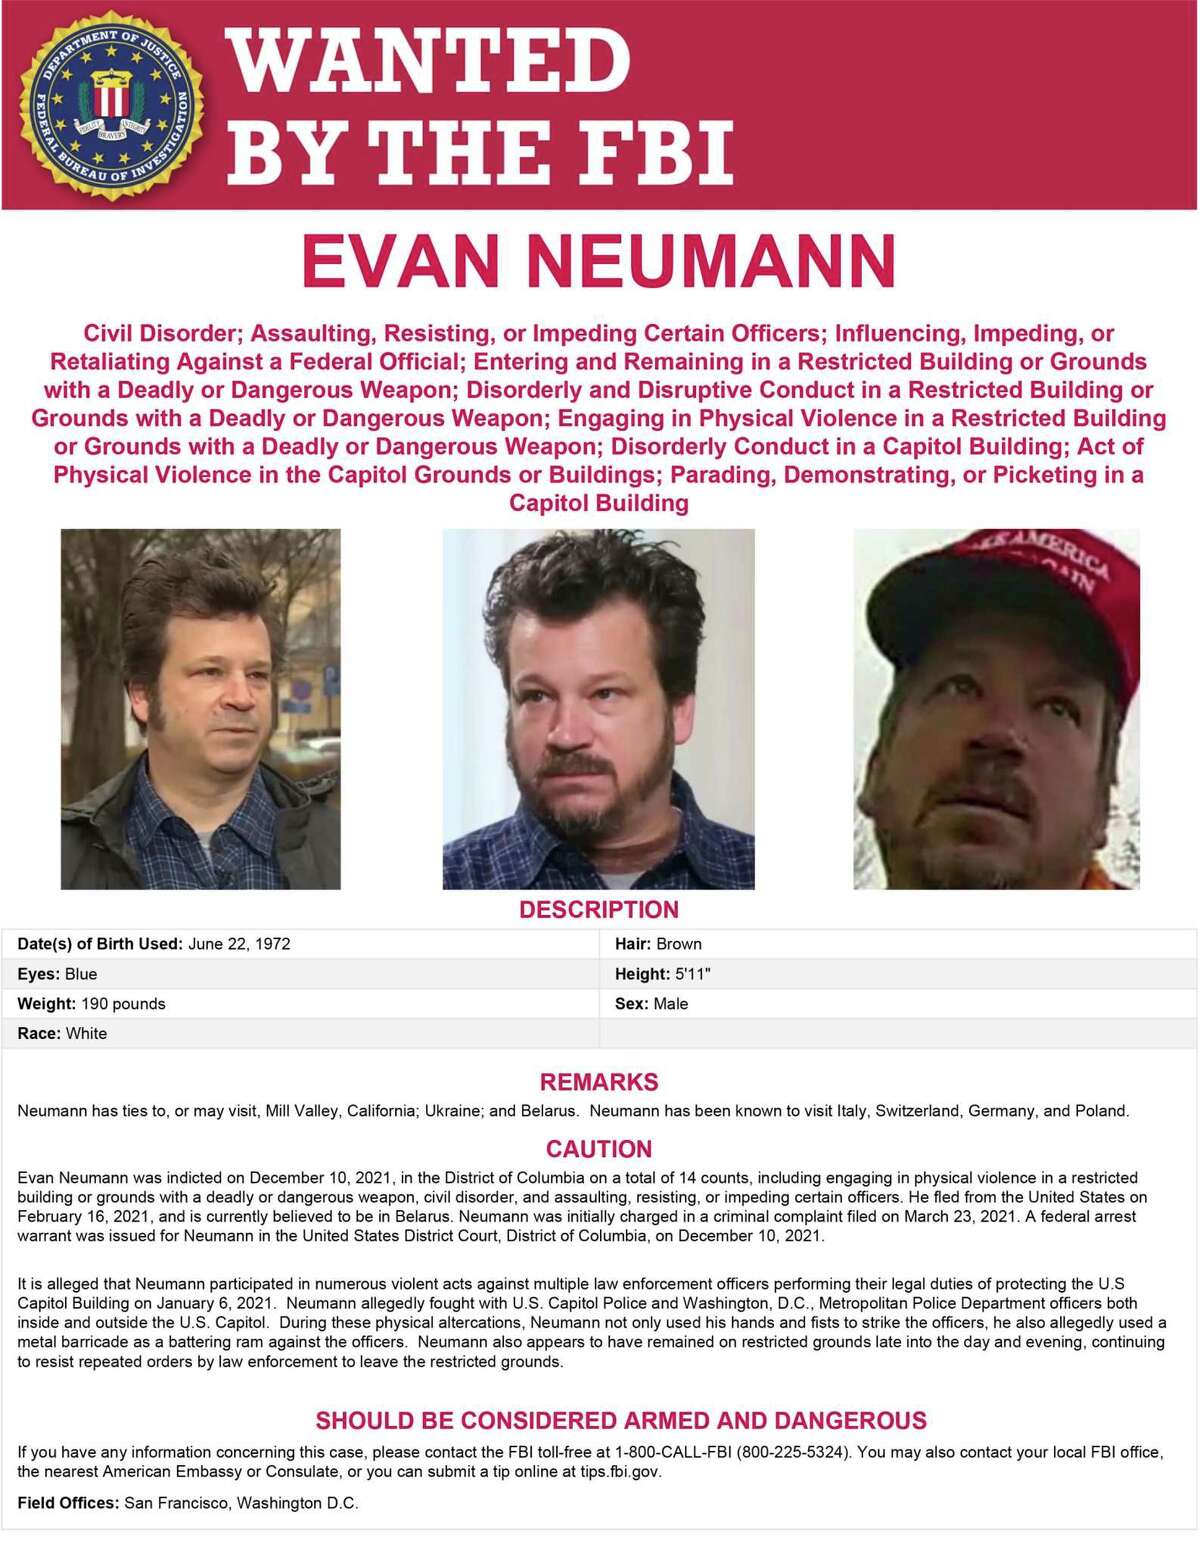 "Wanted by the FBI" poster of Evan Neumann